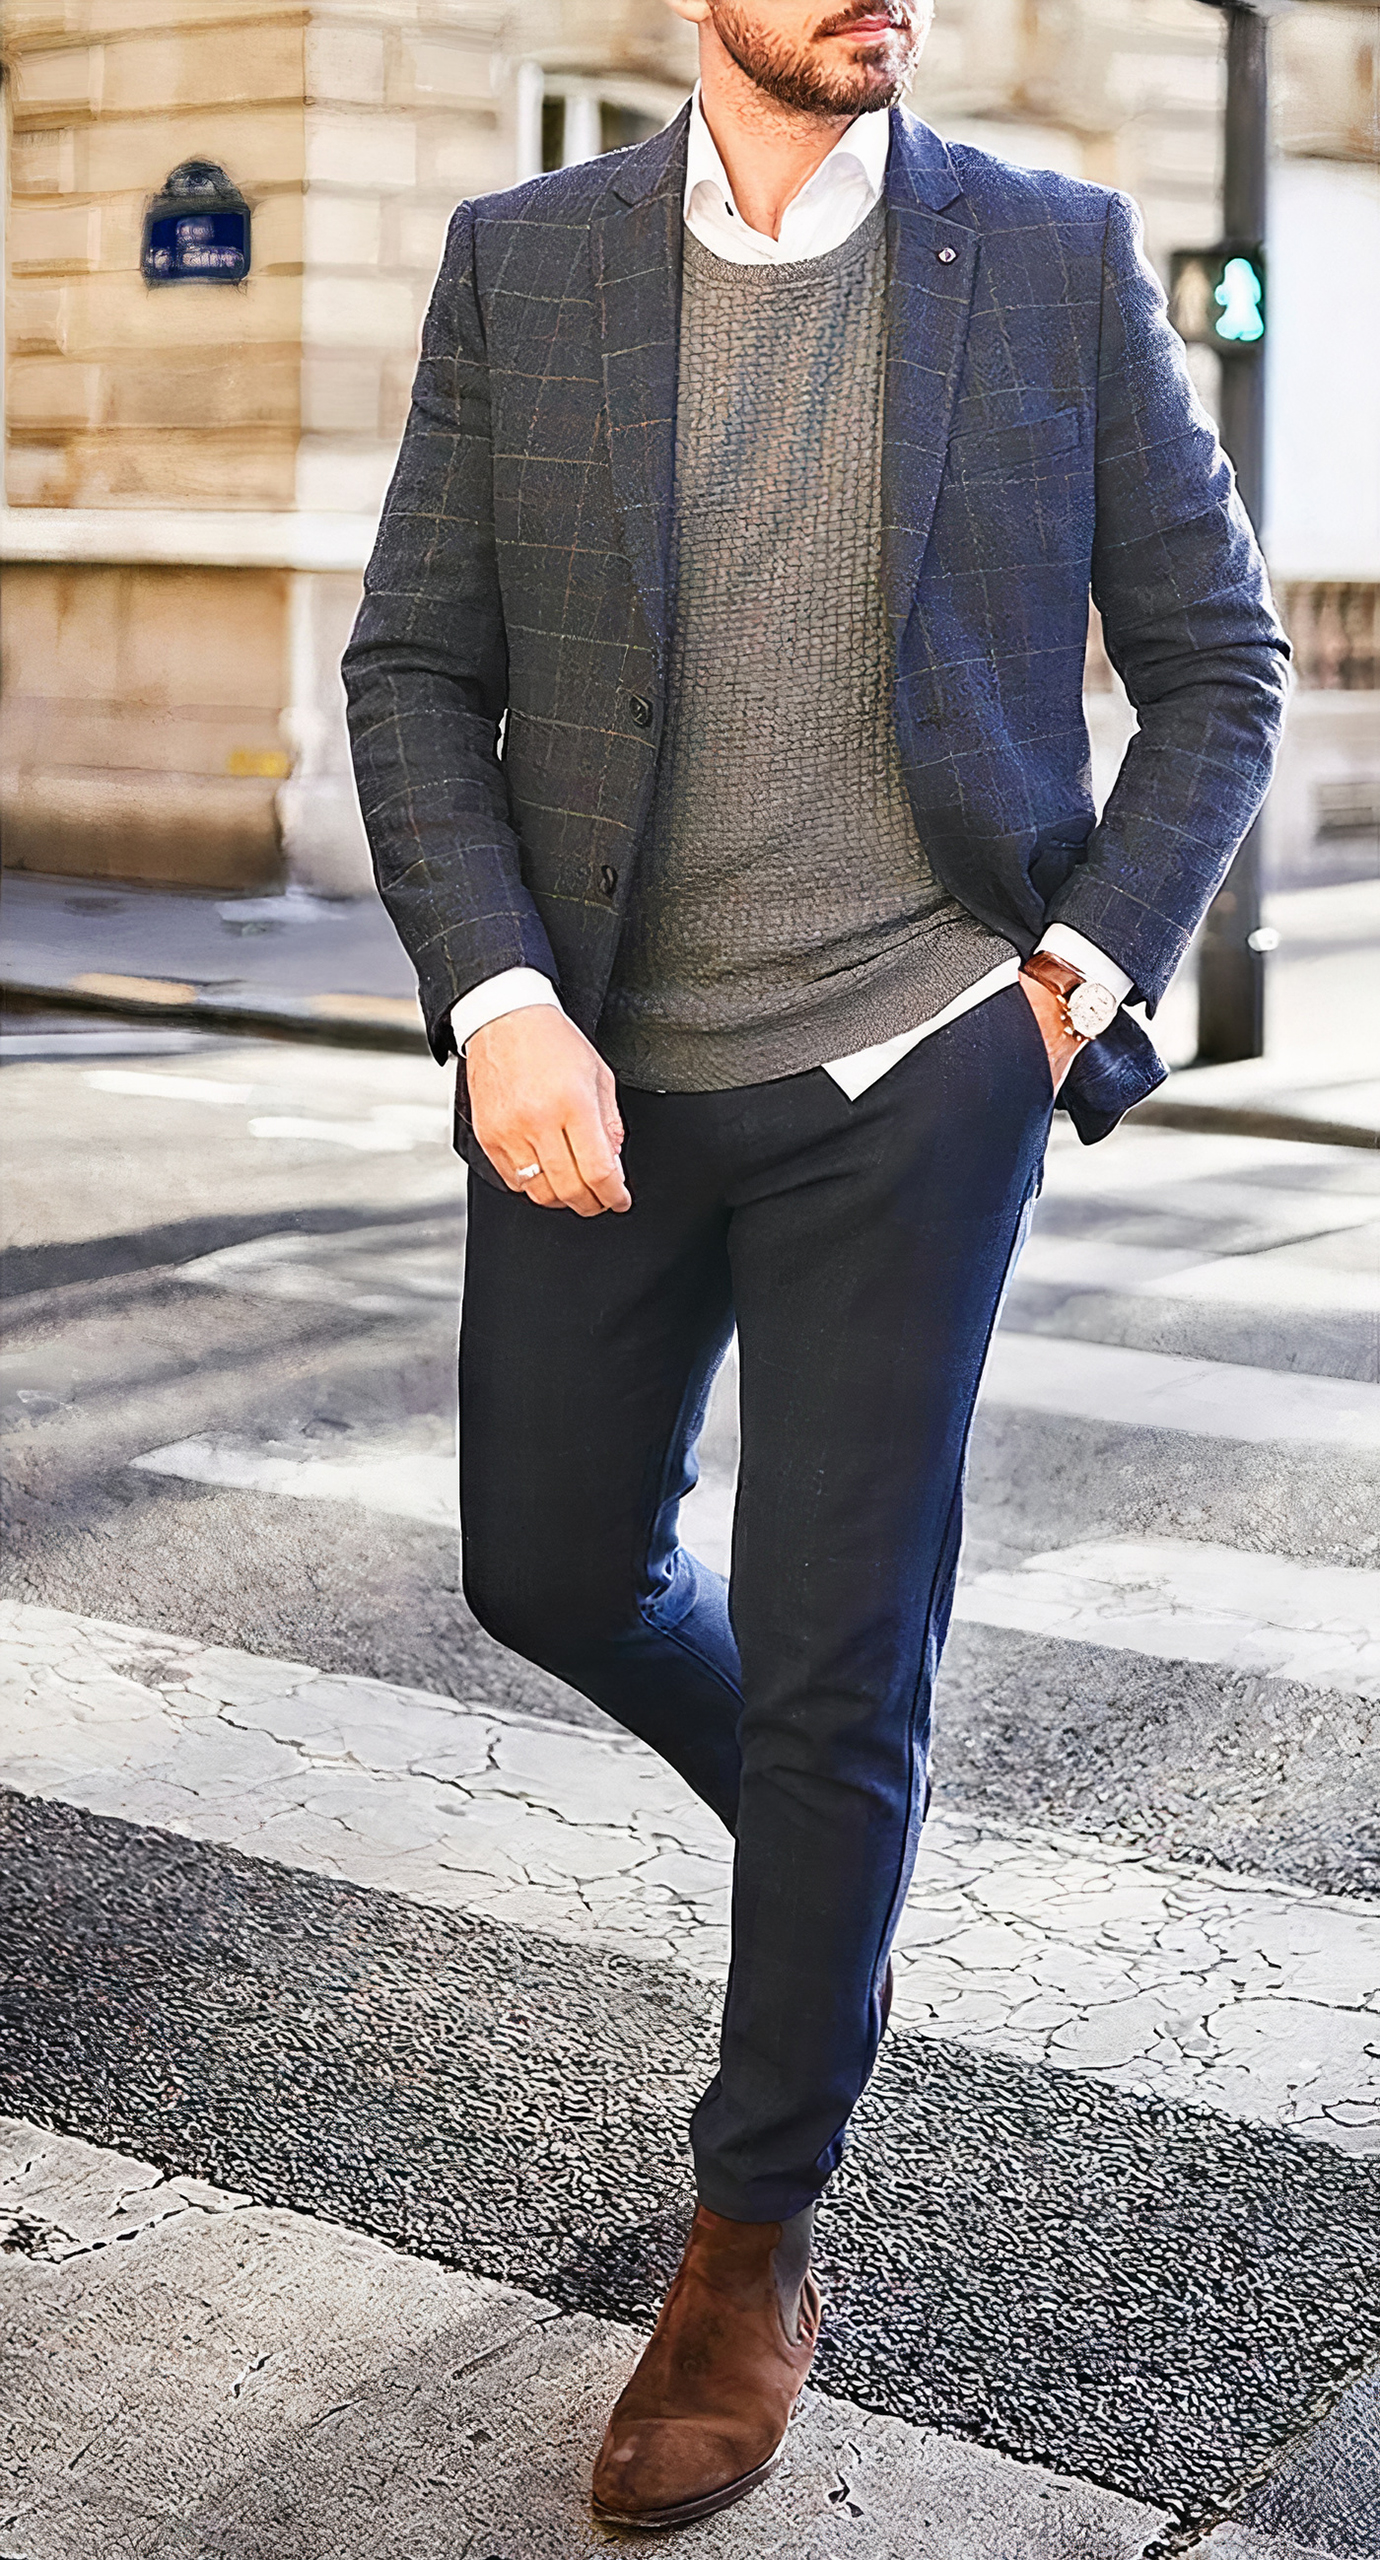 Grey blazer and navy pants with sweater and shirt